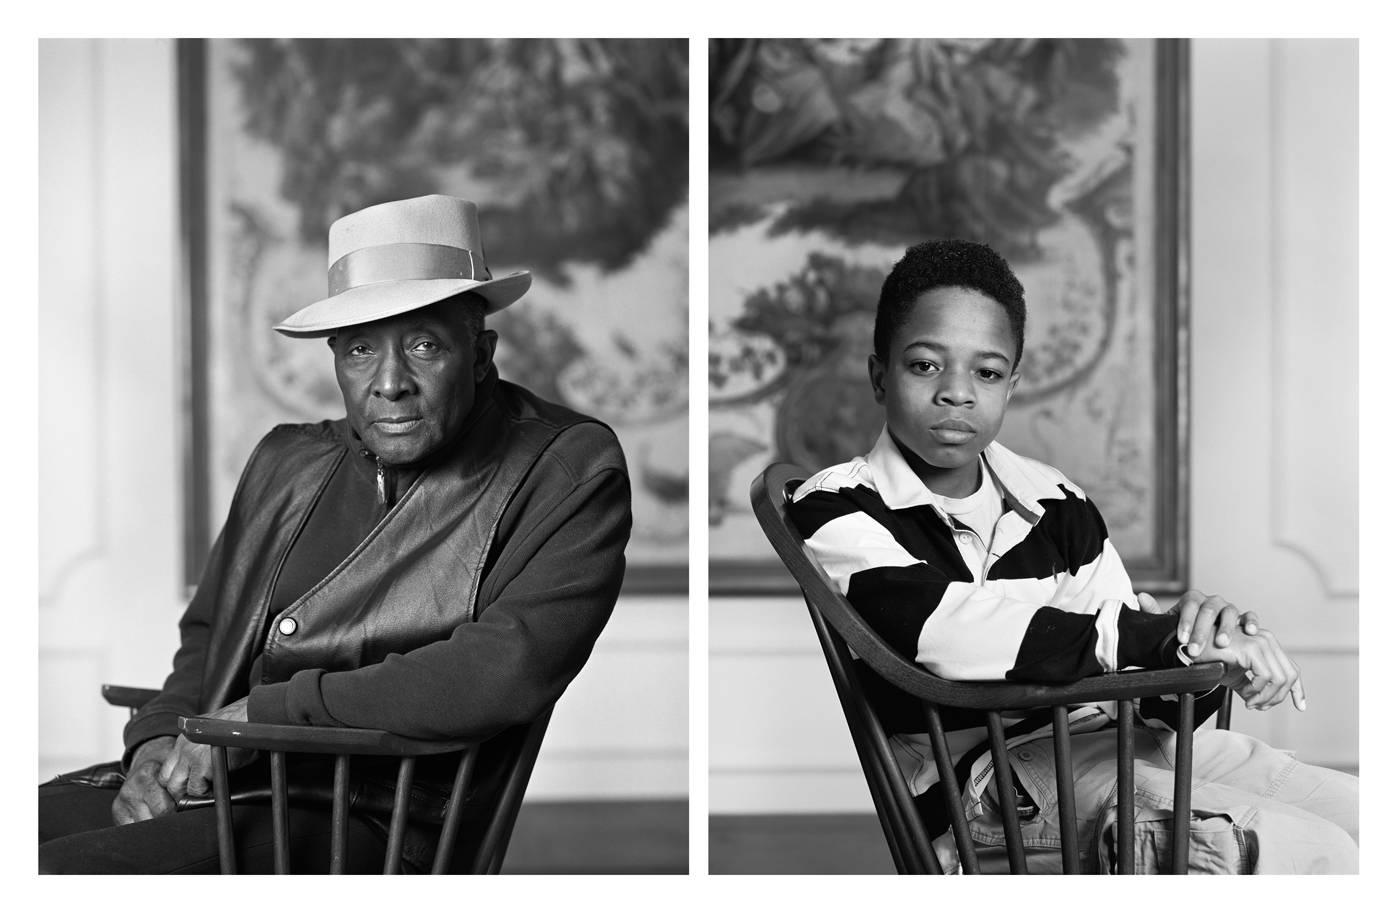 Dawoud Bey Portrait Photograph - The Birmingham Project: Fred Stewart ll and Tyler Collins